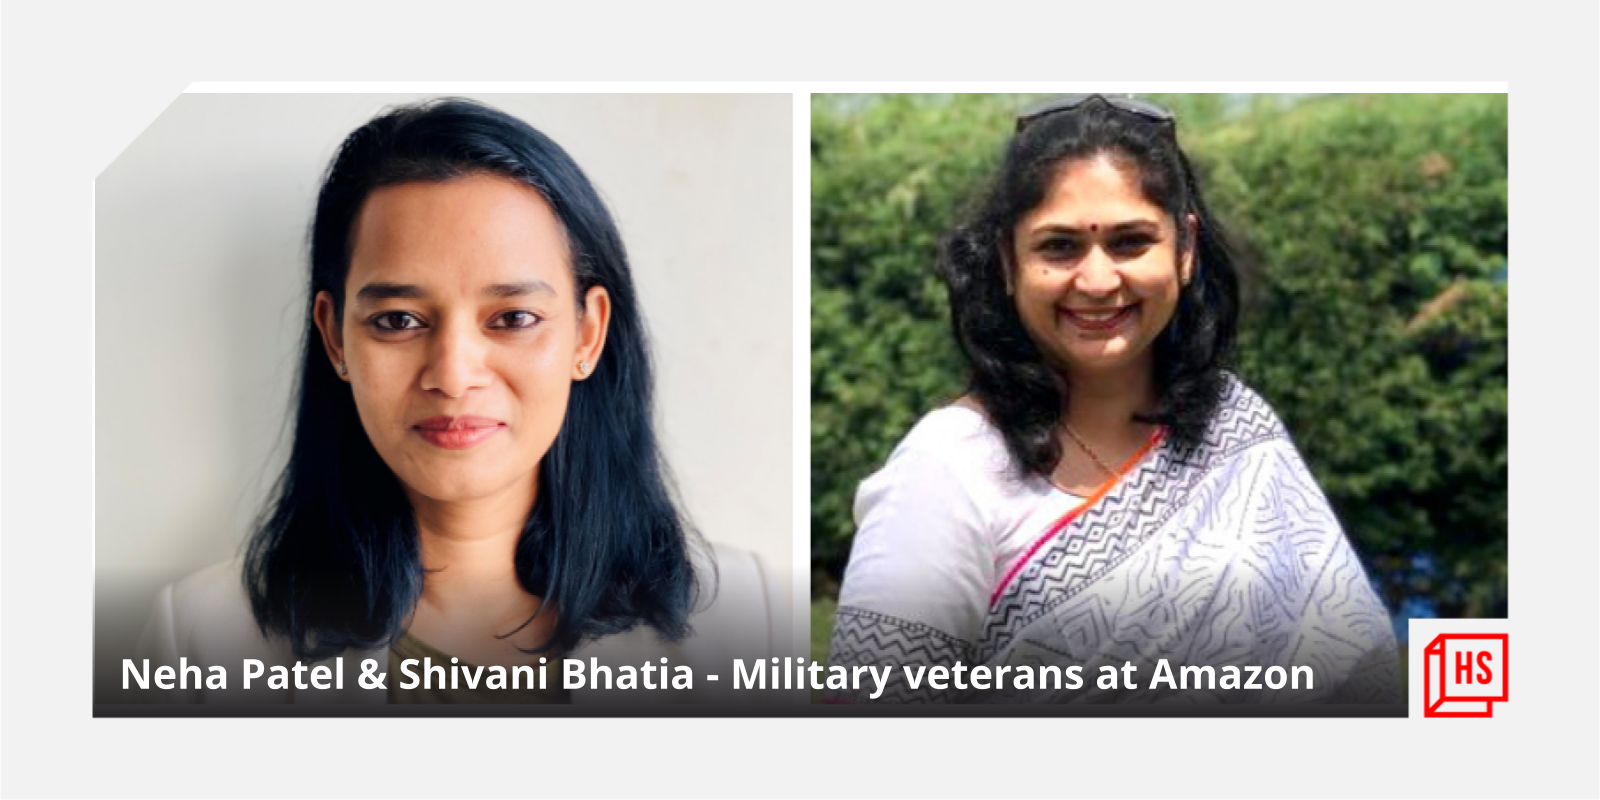 Meet the Army women who have forged new careers at Amazon India

